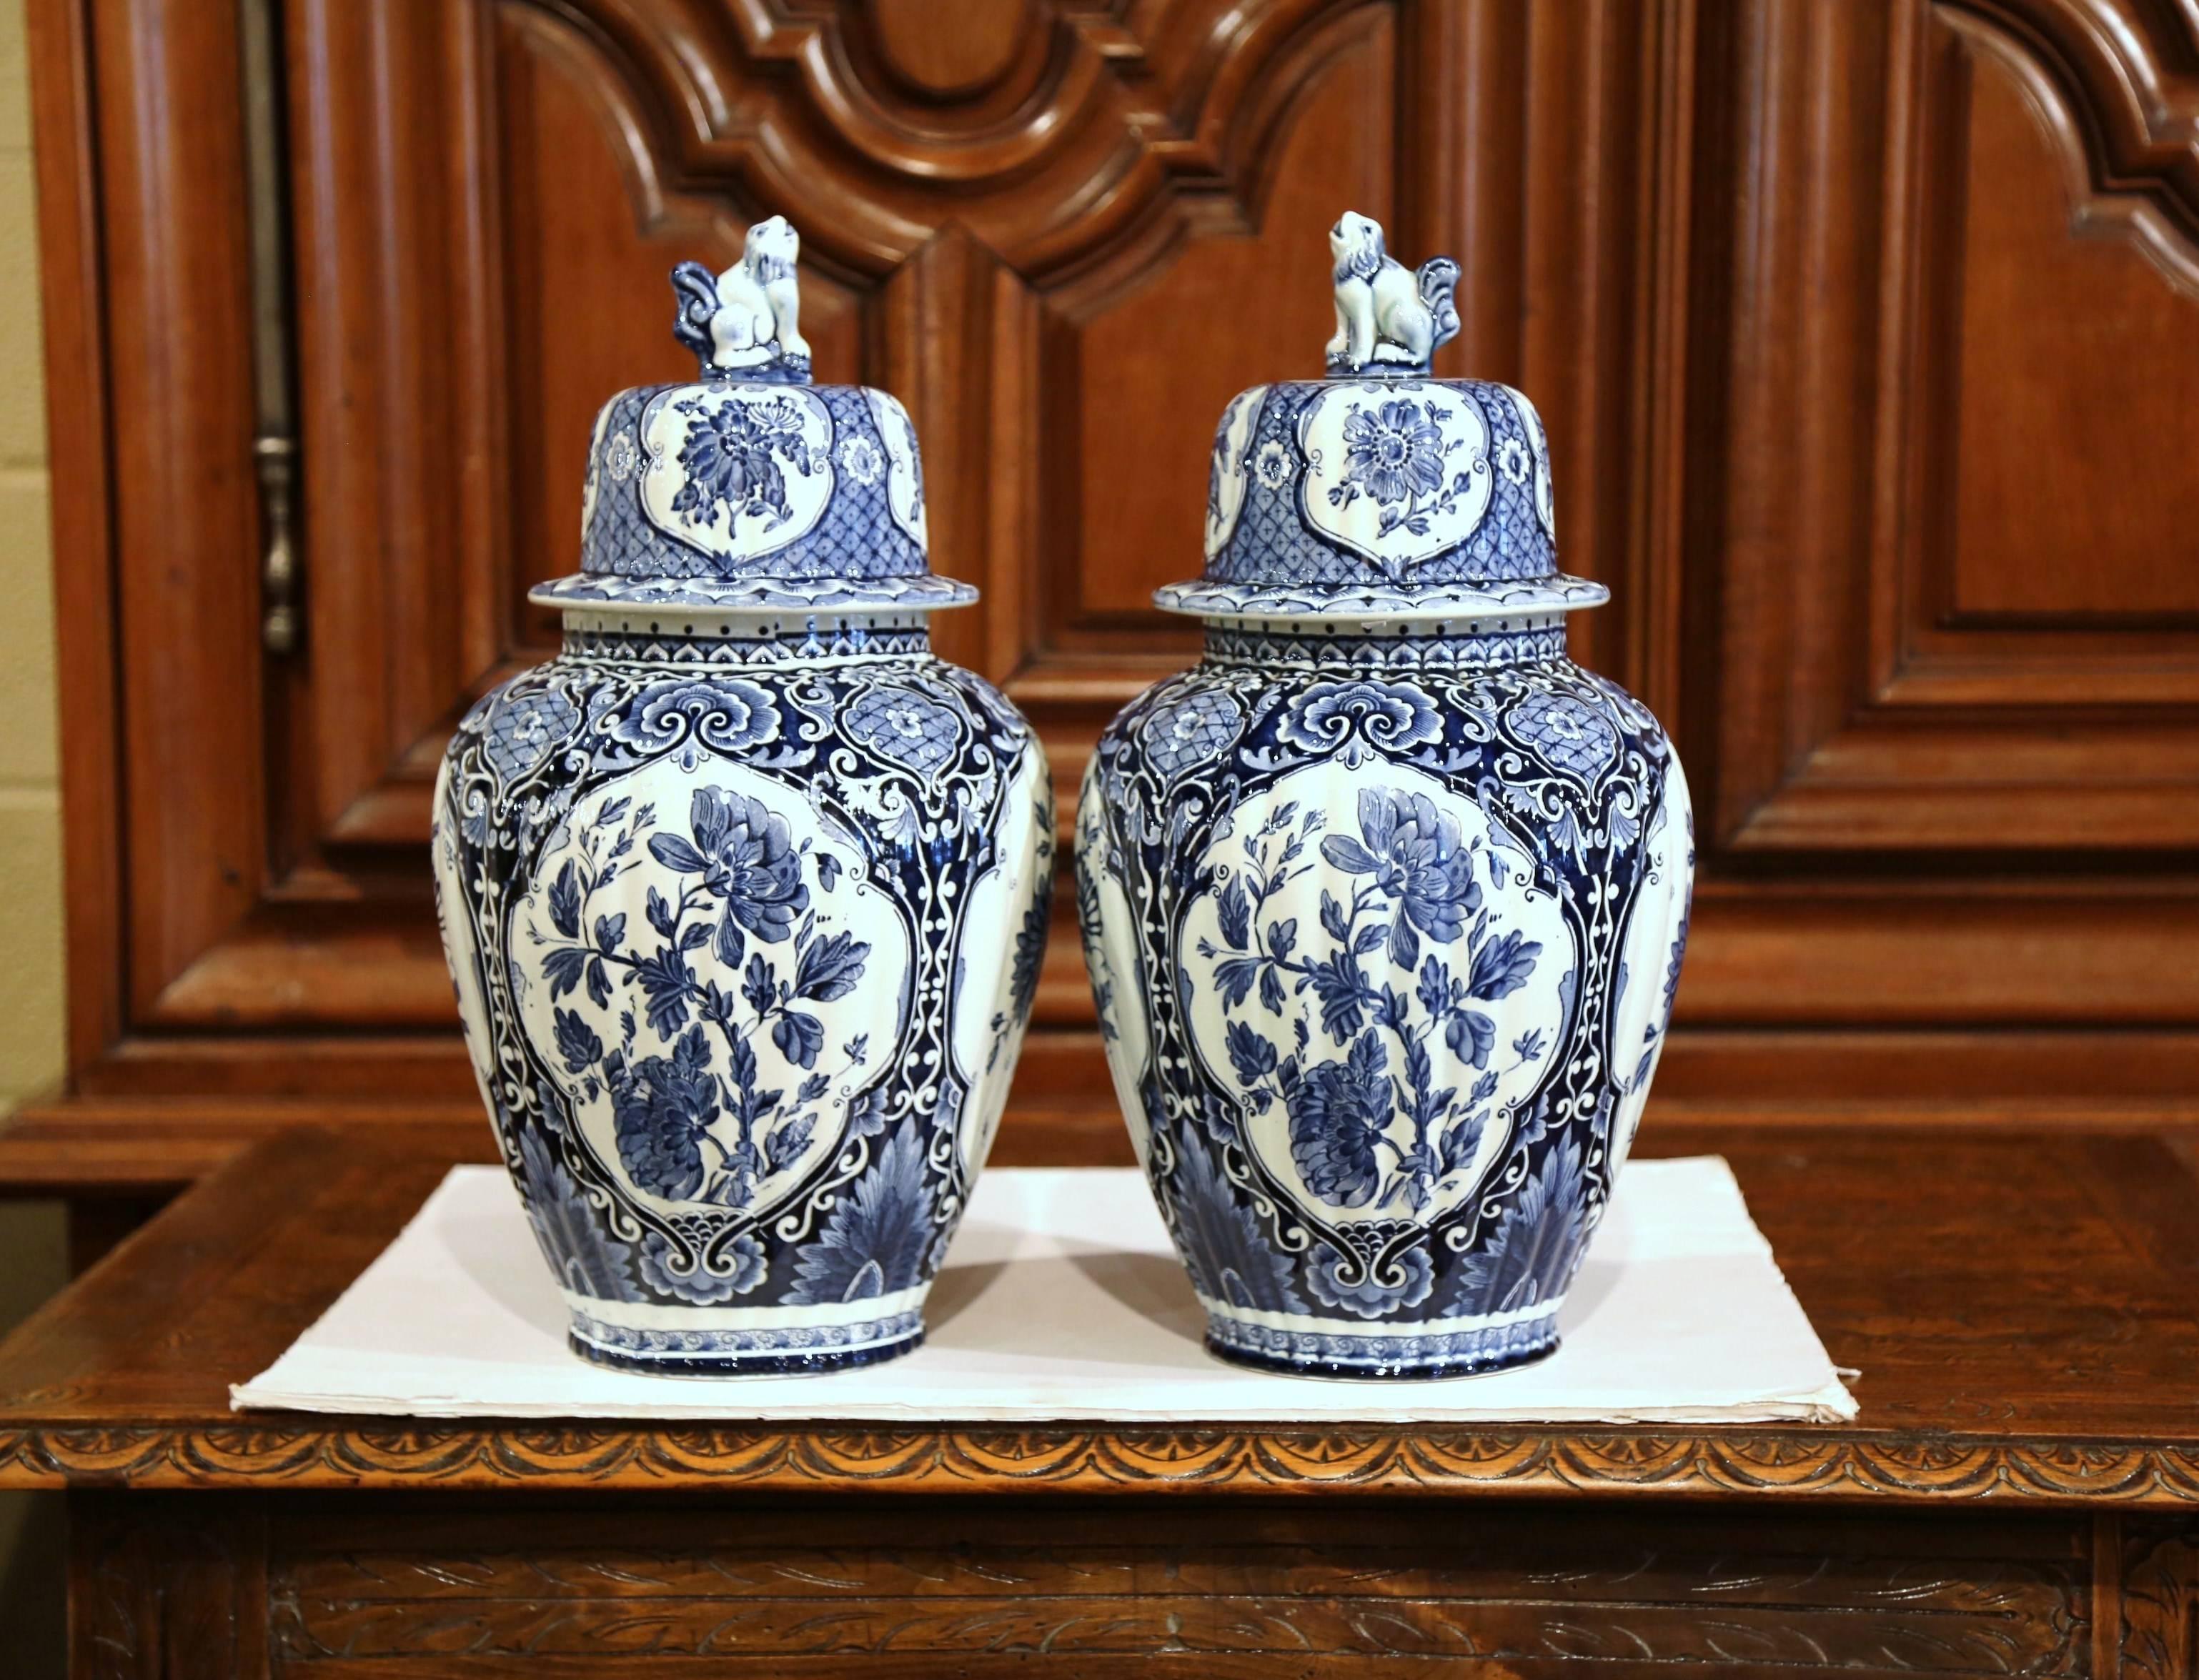 Pair of Mid-20th Century Dutch Blue and White Maastricht Delft Ginger Jars 1